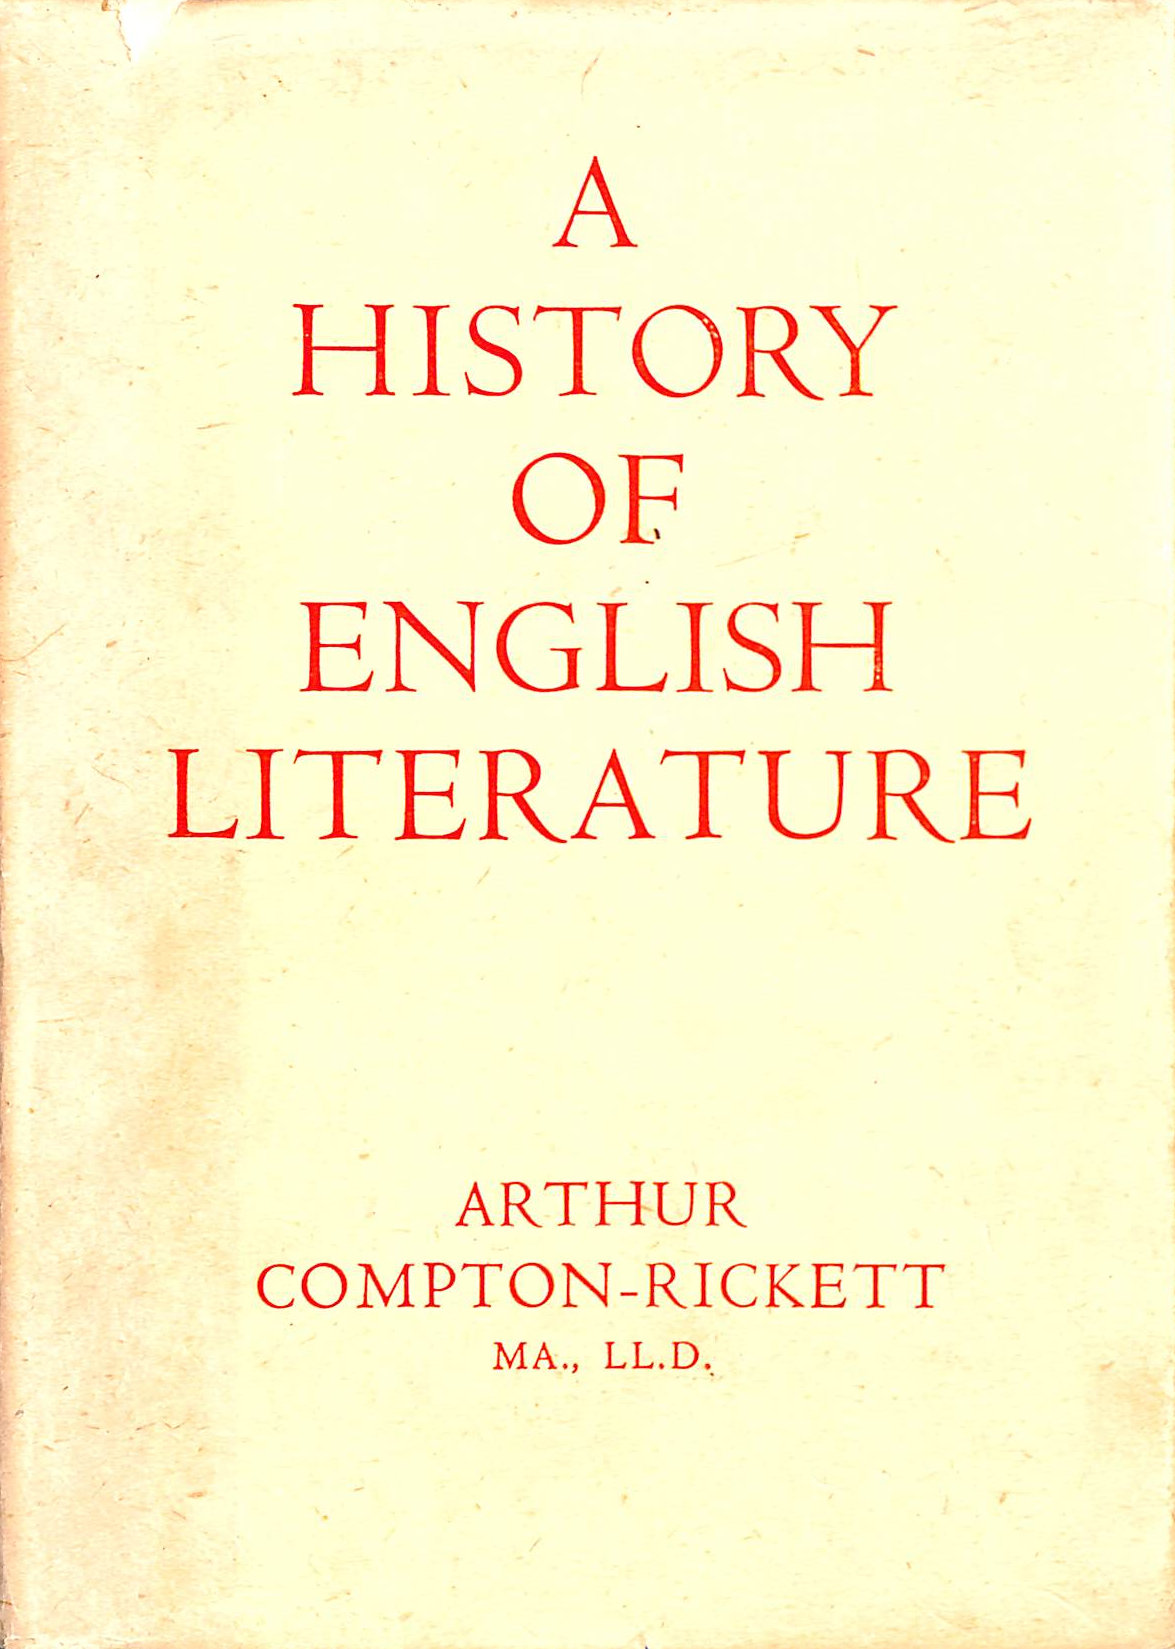 COMPTON-RICKETT ARTHUR - A History of English Literature From earlier times to 1916